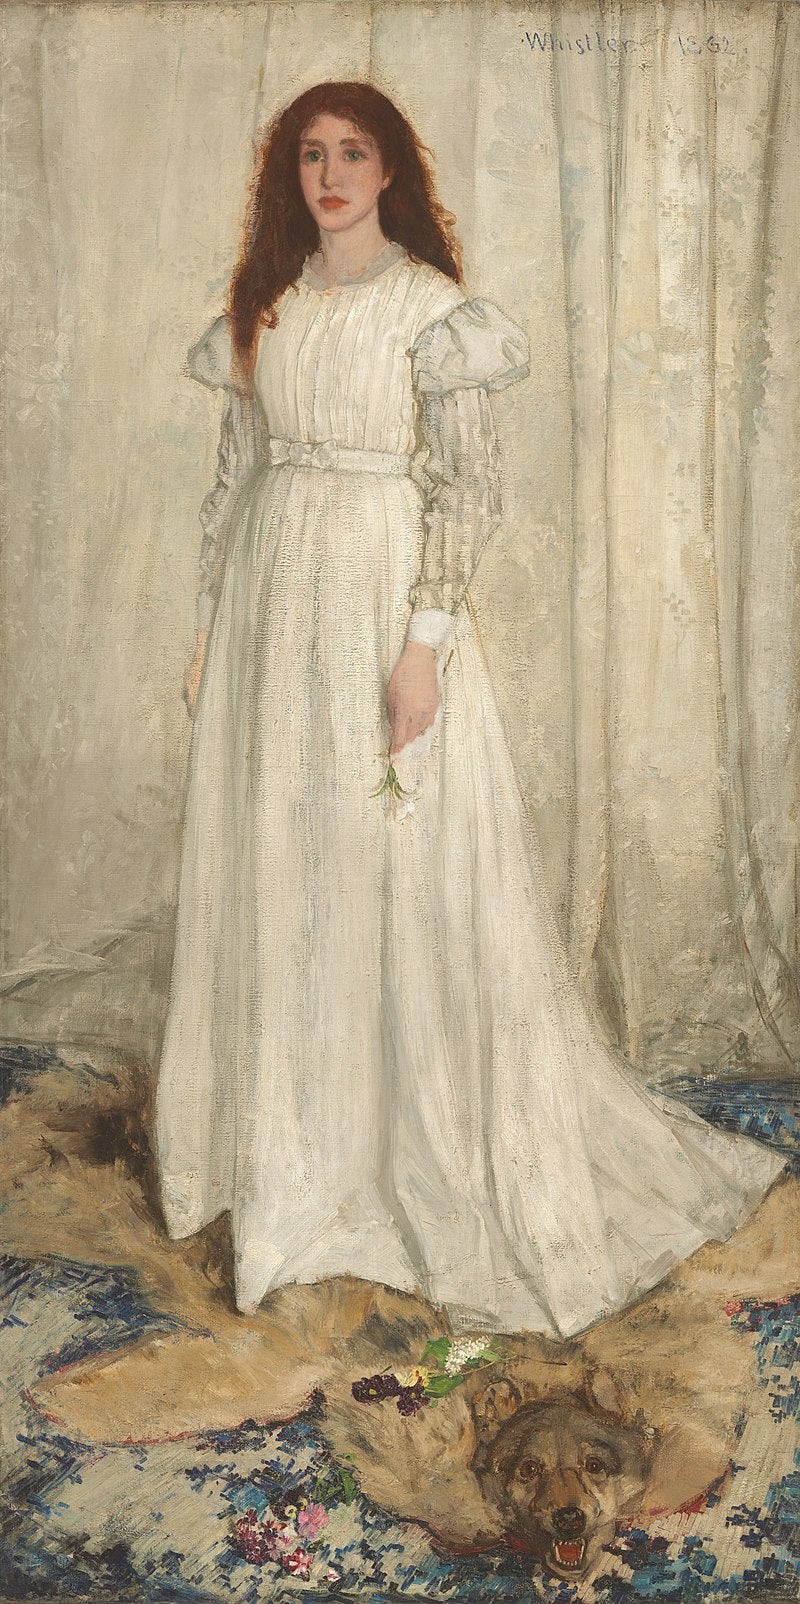 Symphony in White, No. 1: The White Girl by James Abbott McNeill Whistler Reproduction Painting by Blue Surf Art